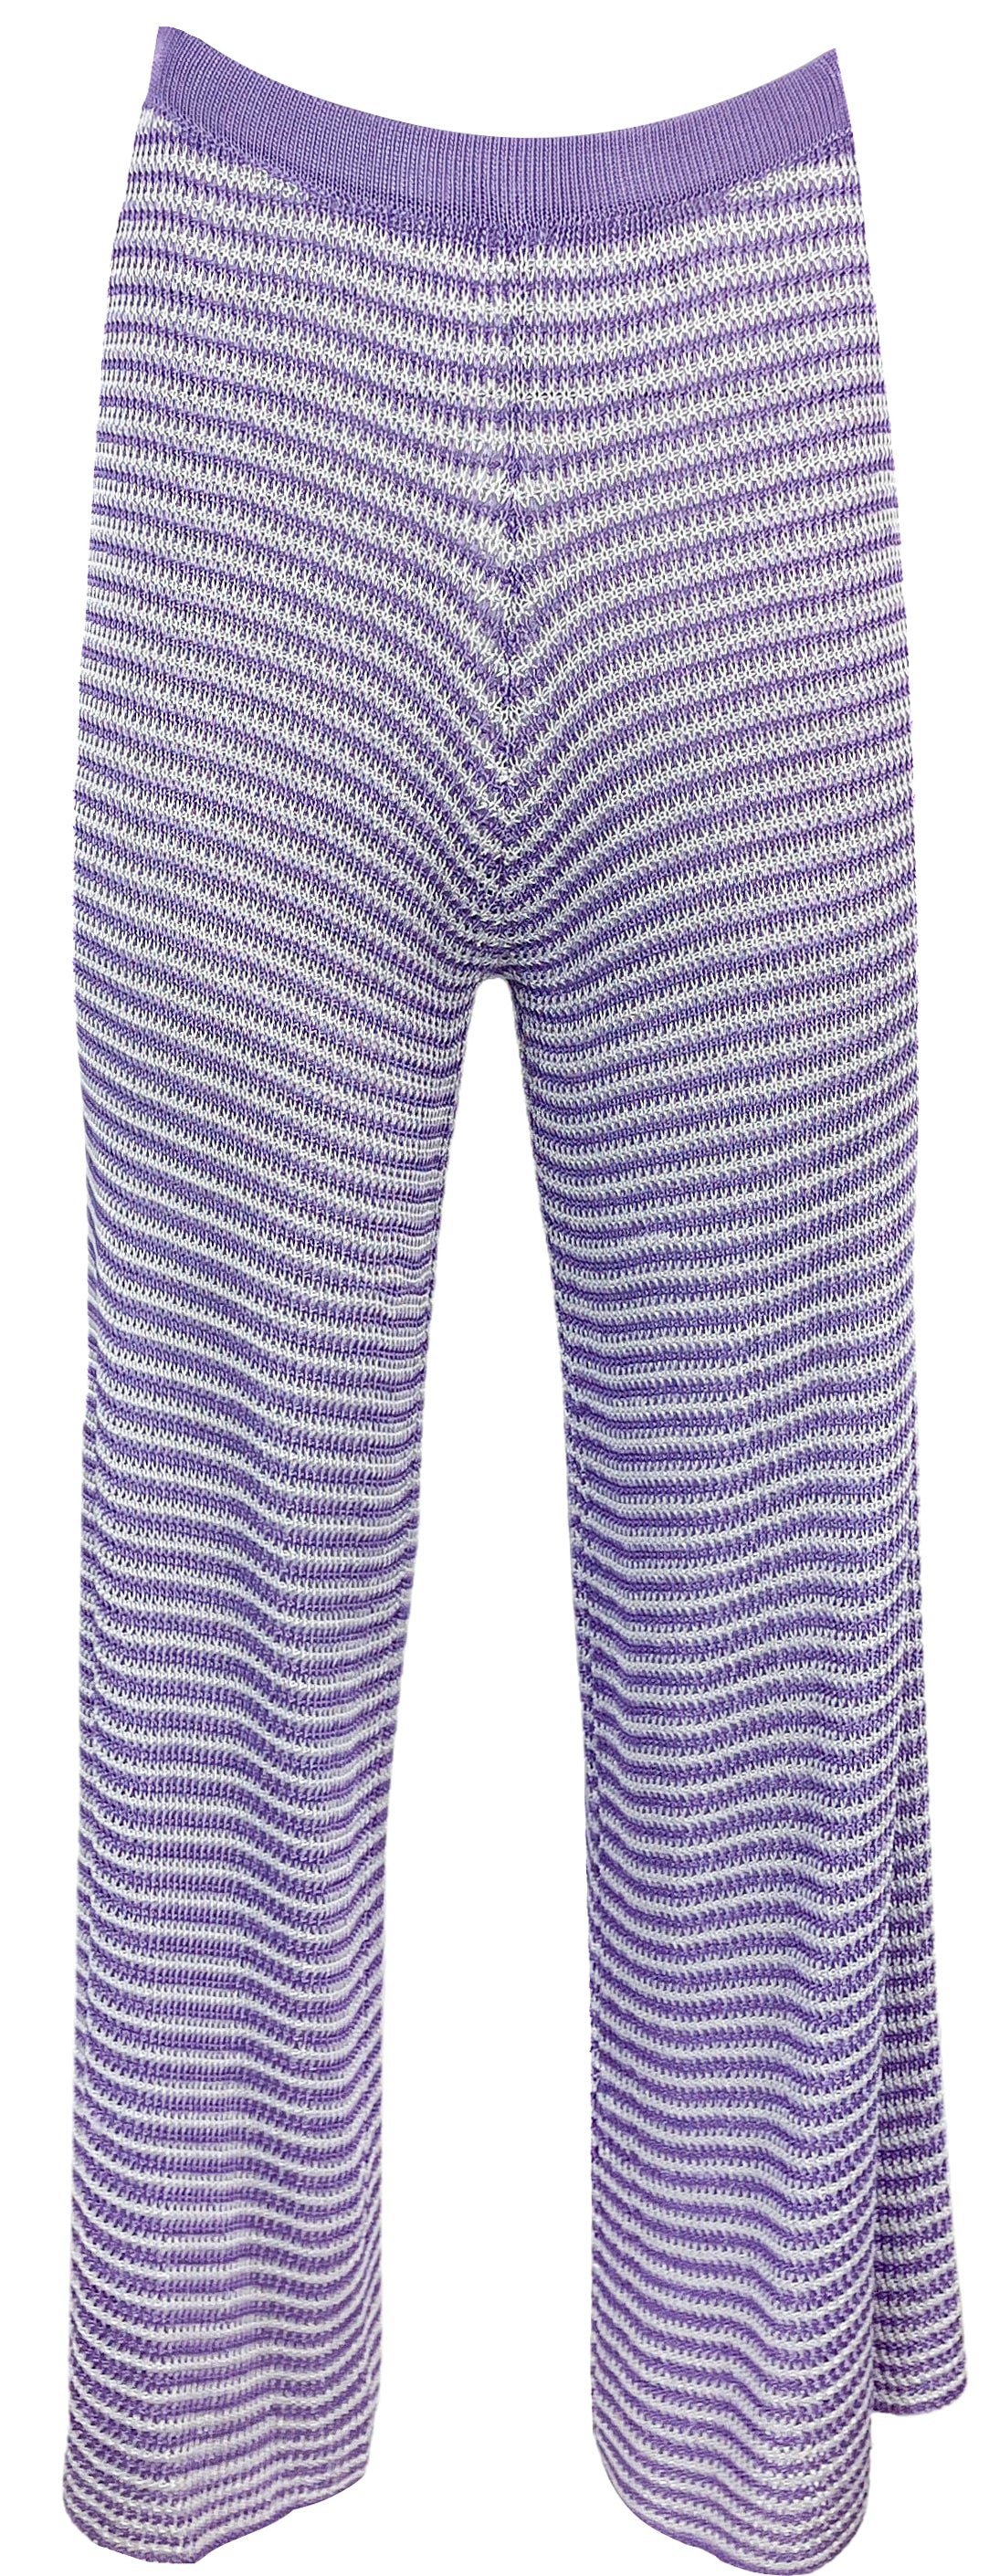 Calle del Mar Crochet Pants in Purple and White - Discounts on Calle del Mar at UAL